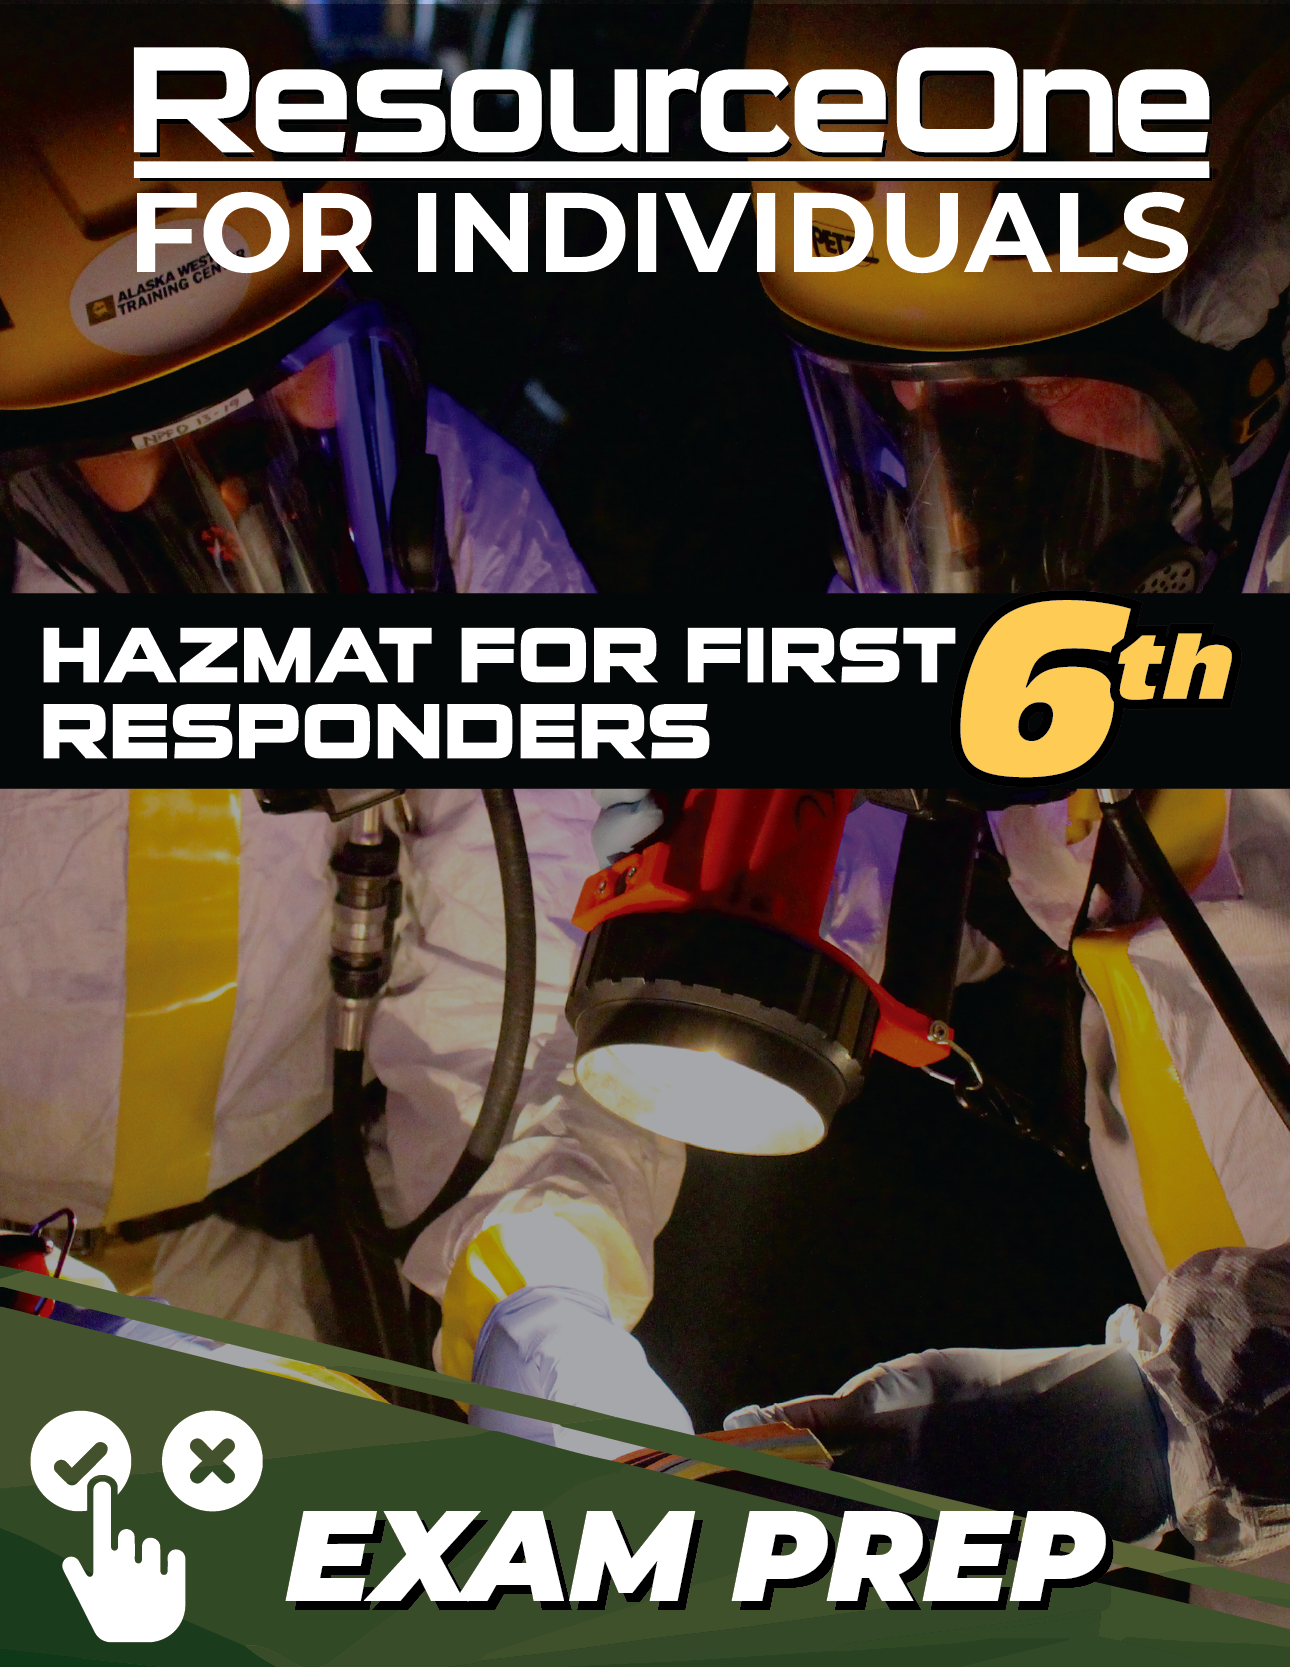 Hazardous Materials for First Responders, 6th Edition Exam Prep for Individuals